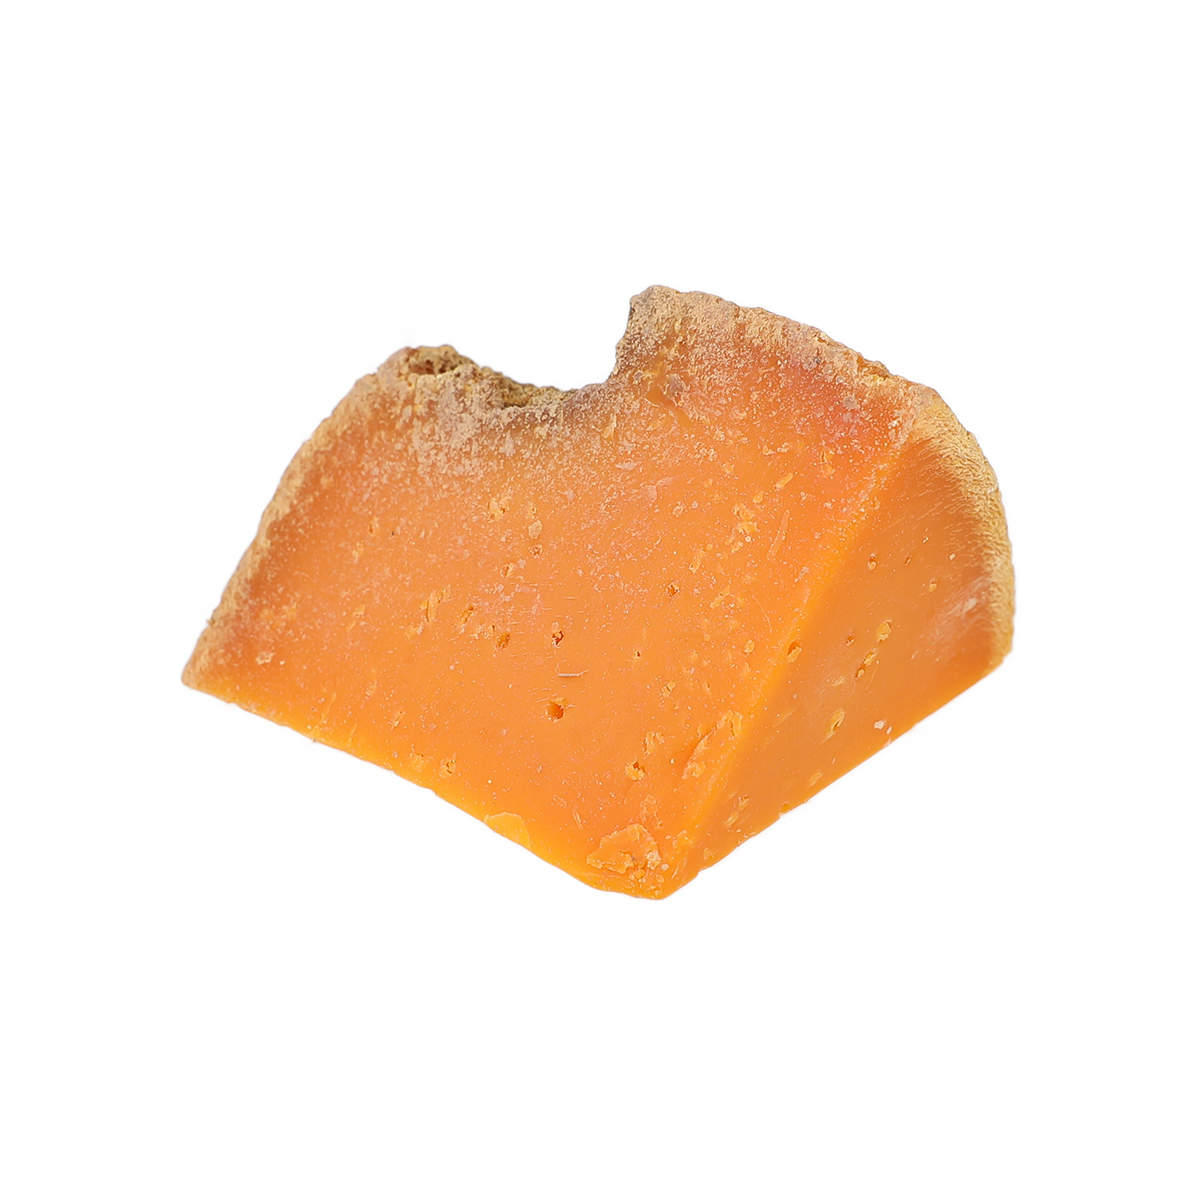 18 Month Aged Mimolette Cheese Tommes Baldor Specialty Foods 